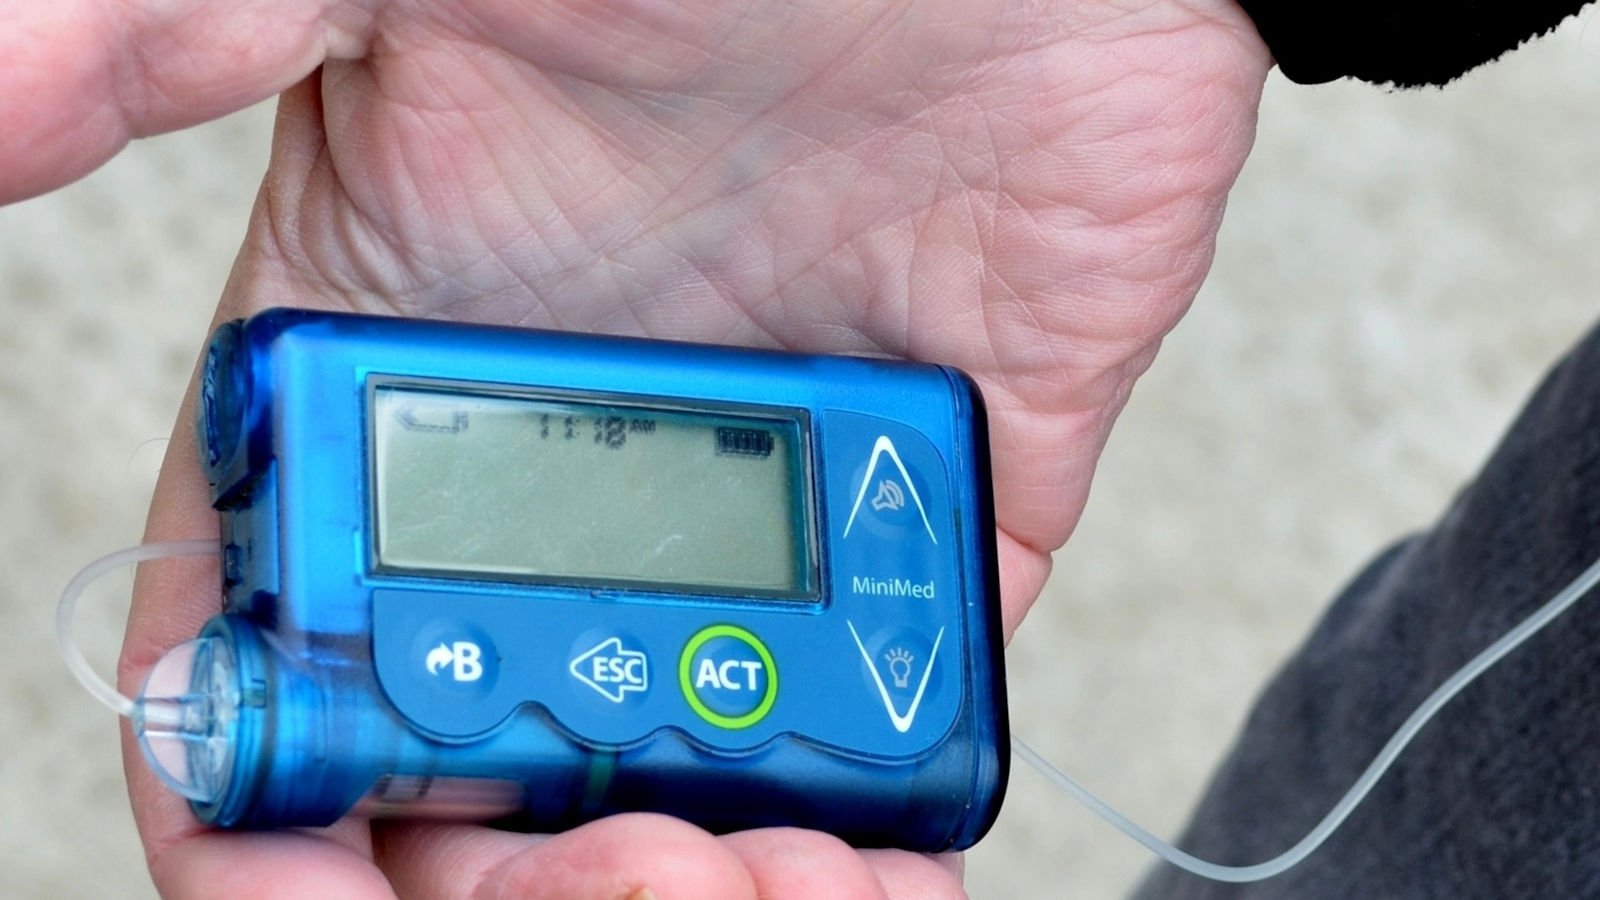 Medtronic urgently recalls insulin pump controllers over hacking concerns